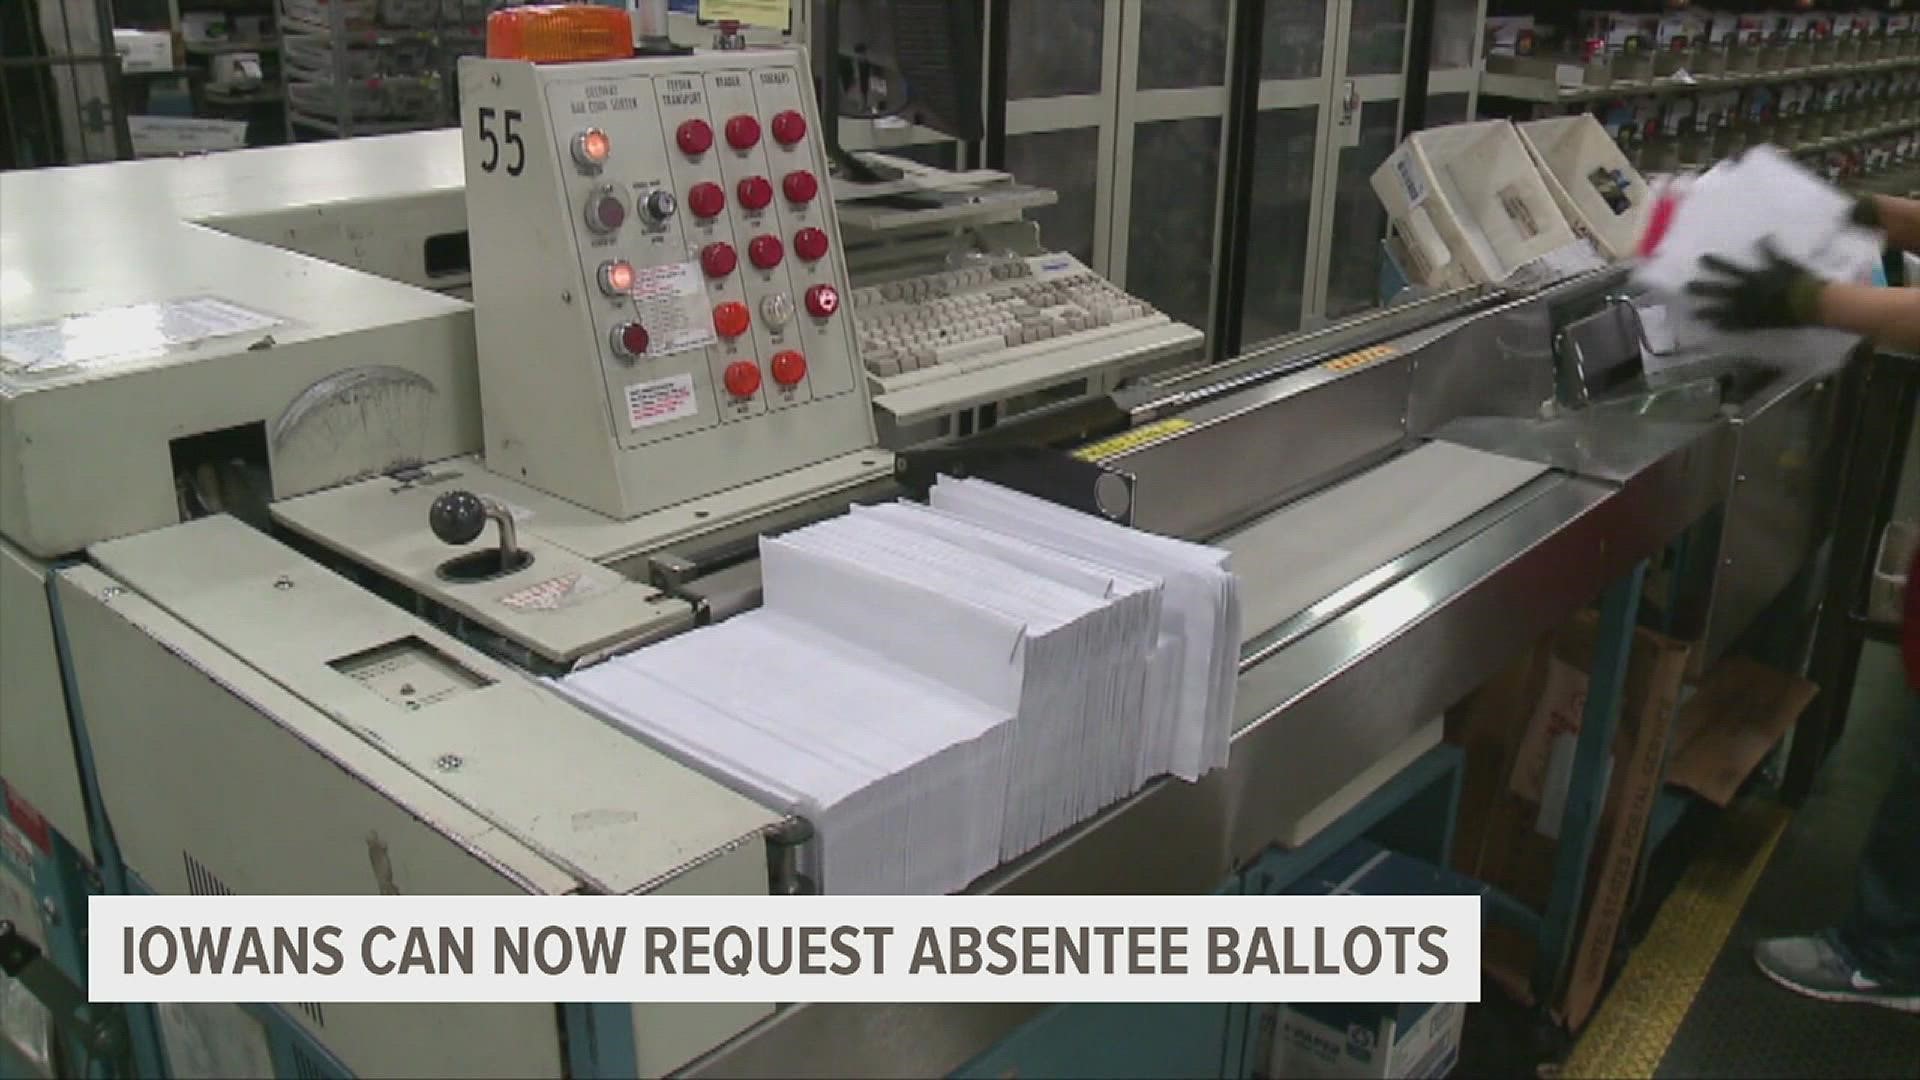 Illinoisans have been able to request their absentee ballots since Aug. 10. Iowans can start requesting their ballots as of Aug. 30.